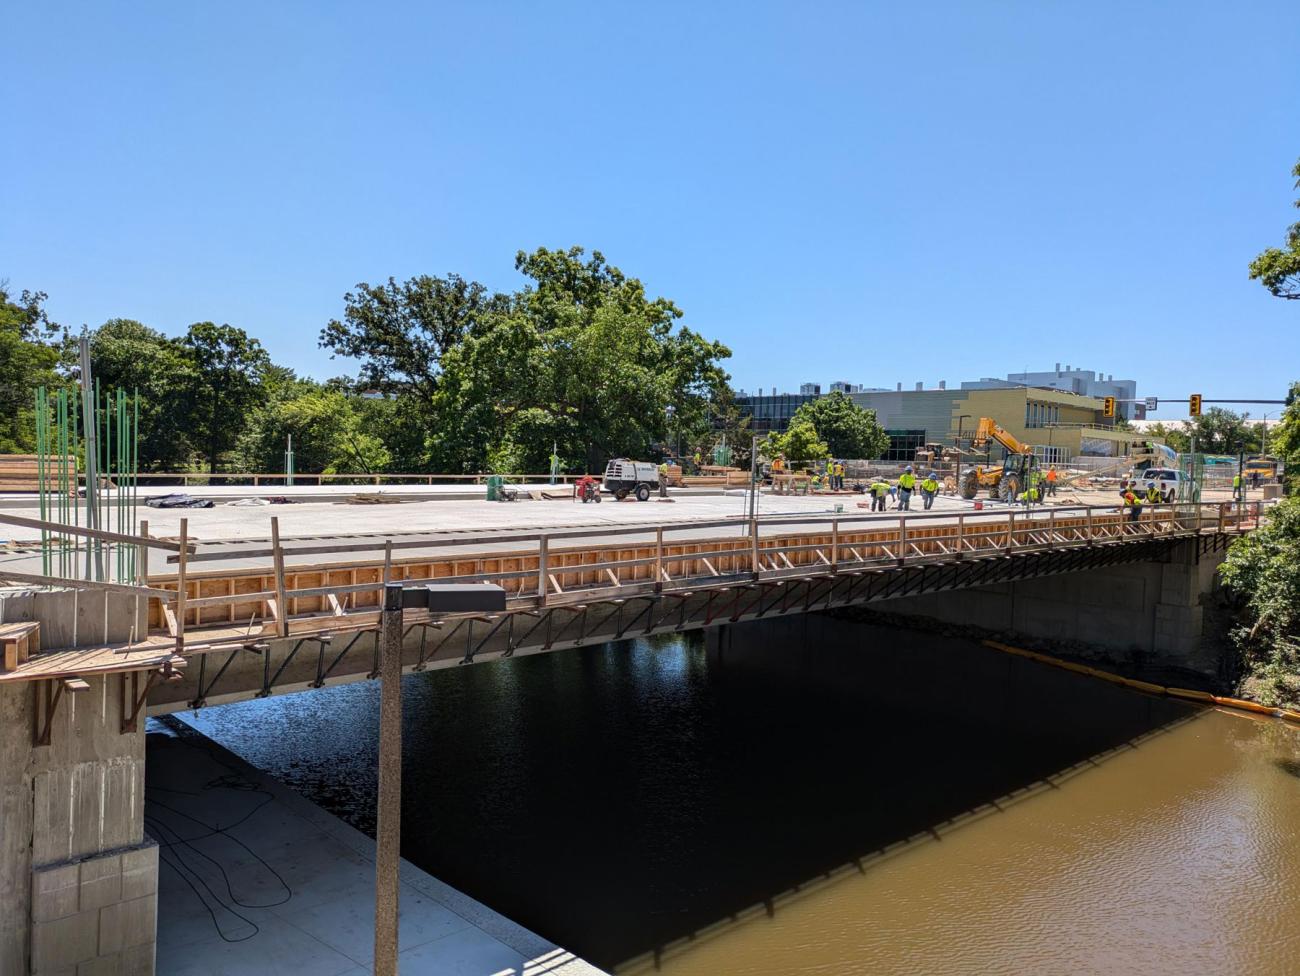 Farm Lane Bridge from pedestrian walkway, workers with floats smooth wet concrete